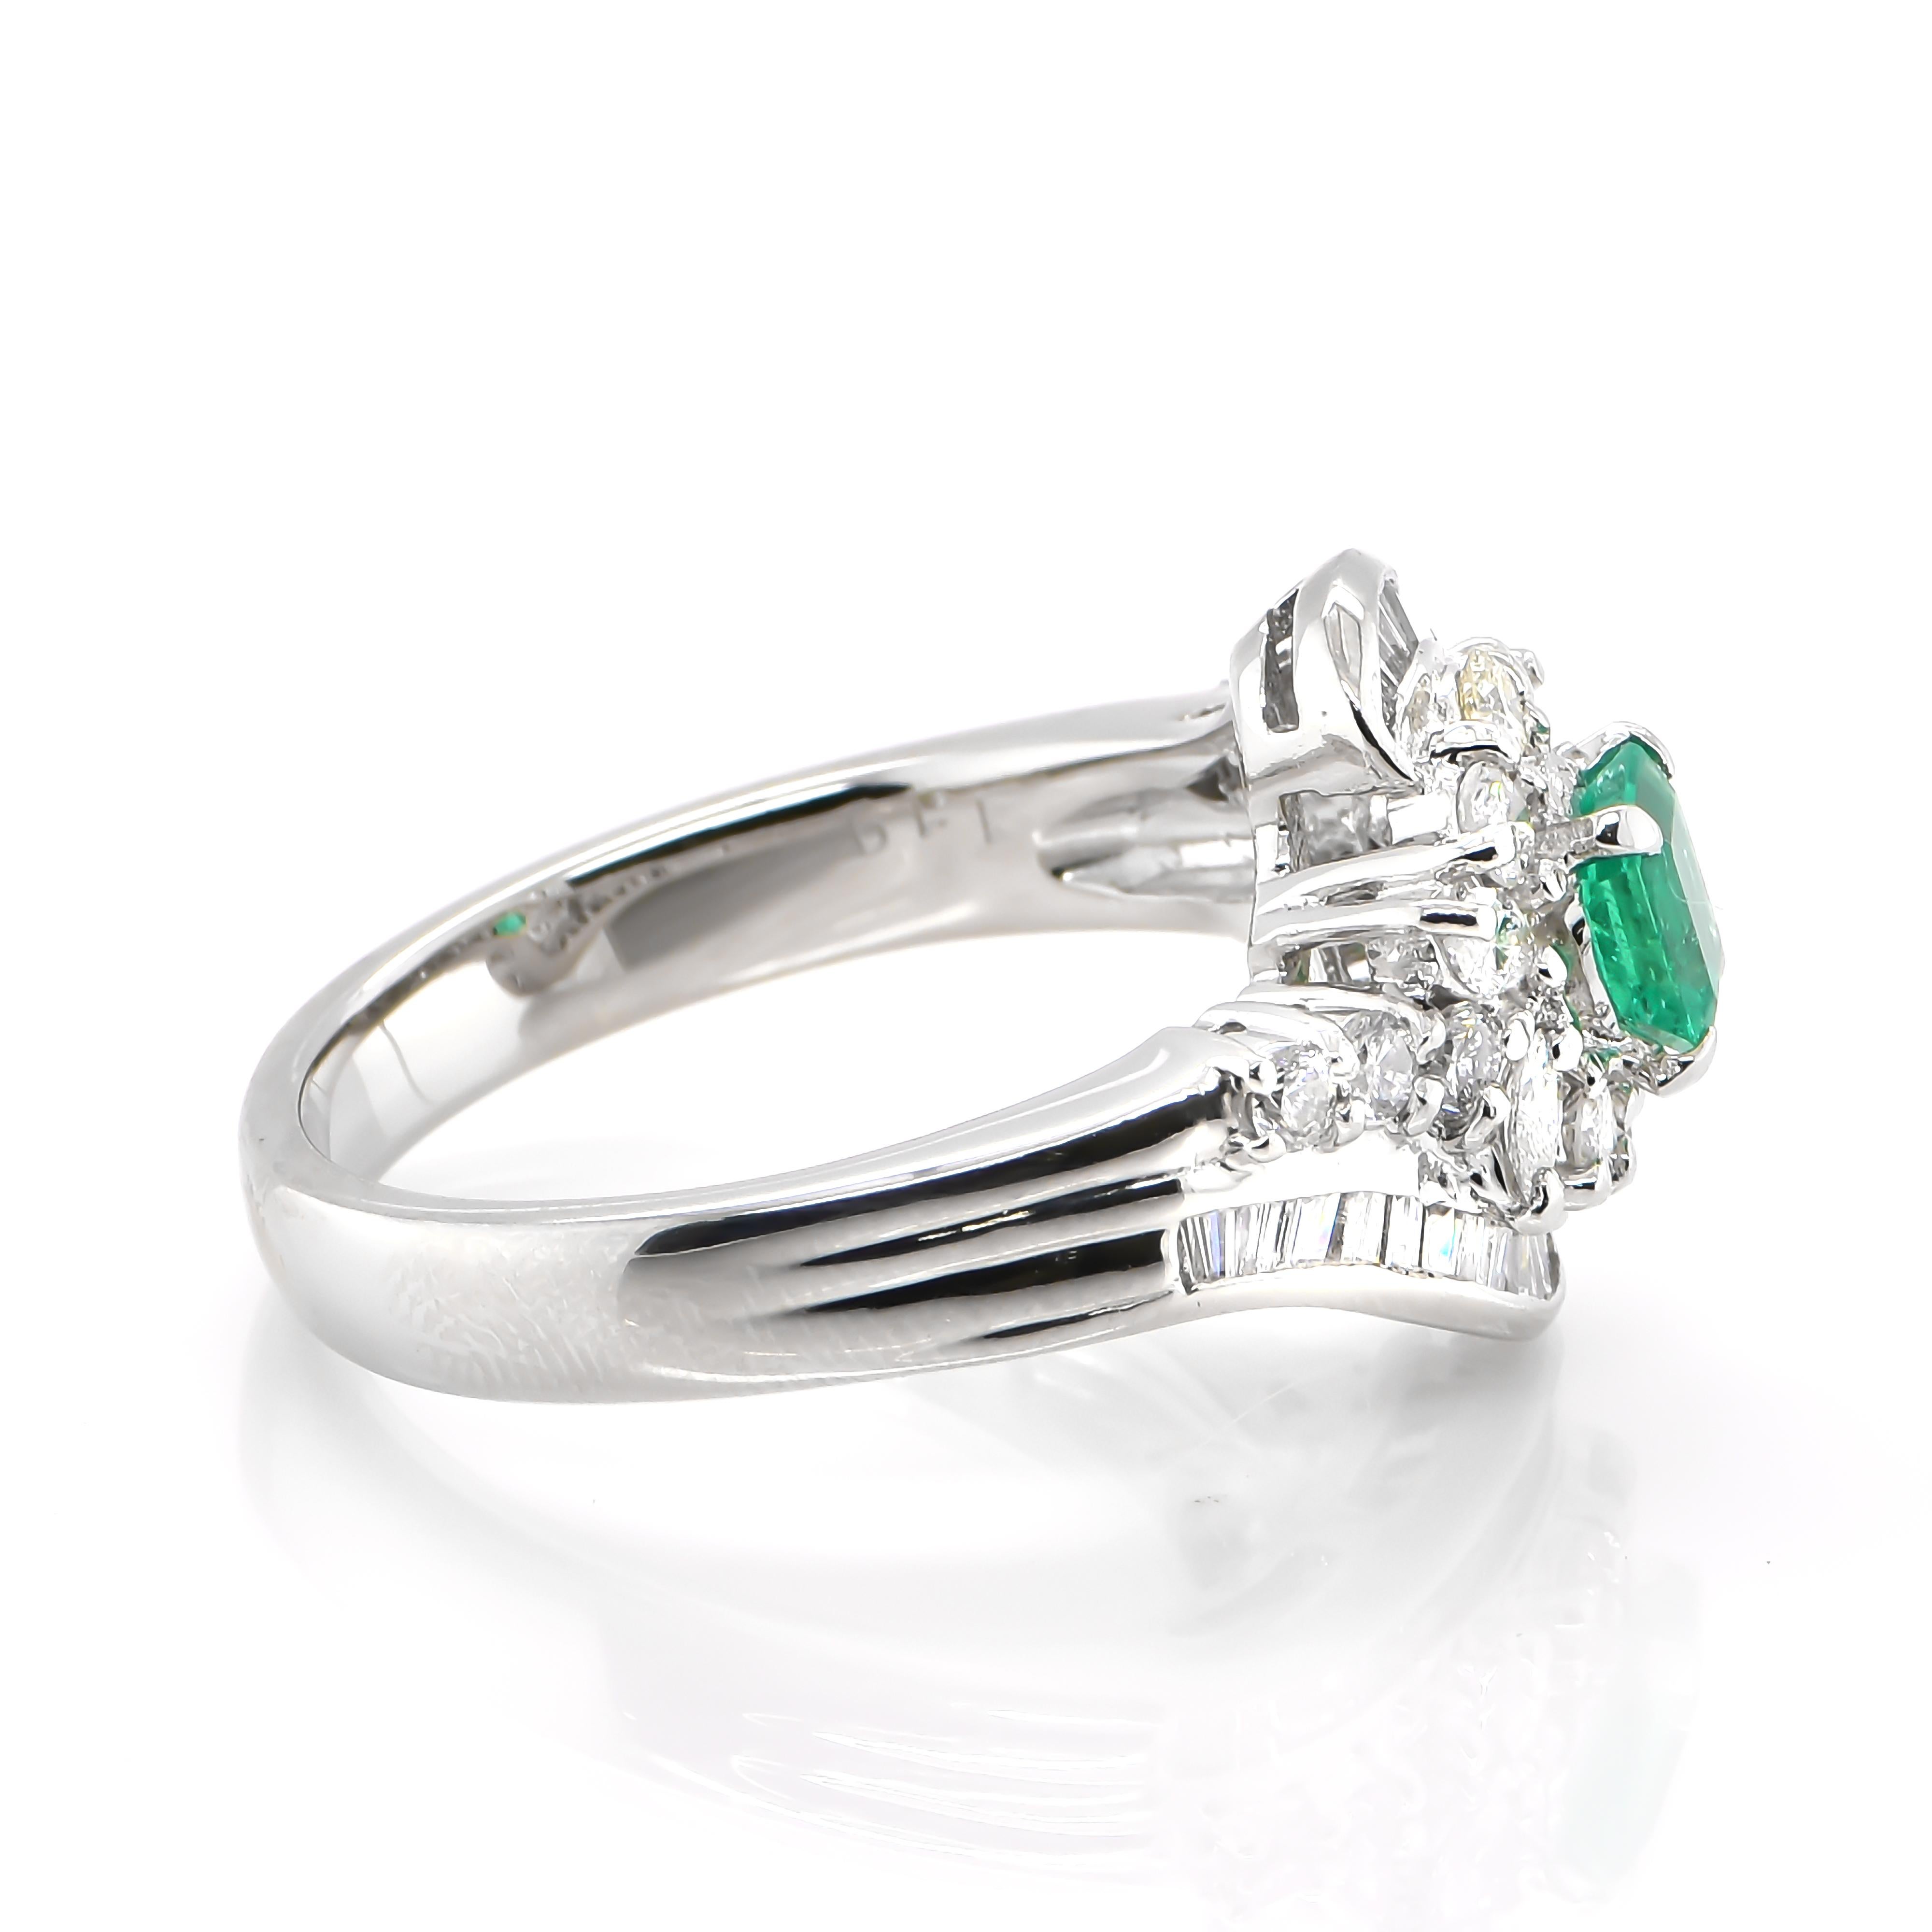 Emerald Cut 0.42 Carat Natural Vivid Green Emerald & Diamond Cocktail Ring Made in Platinum For Sale